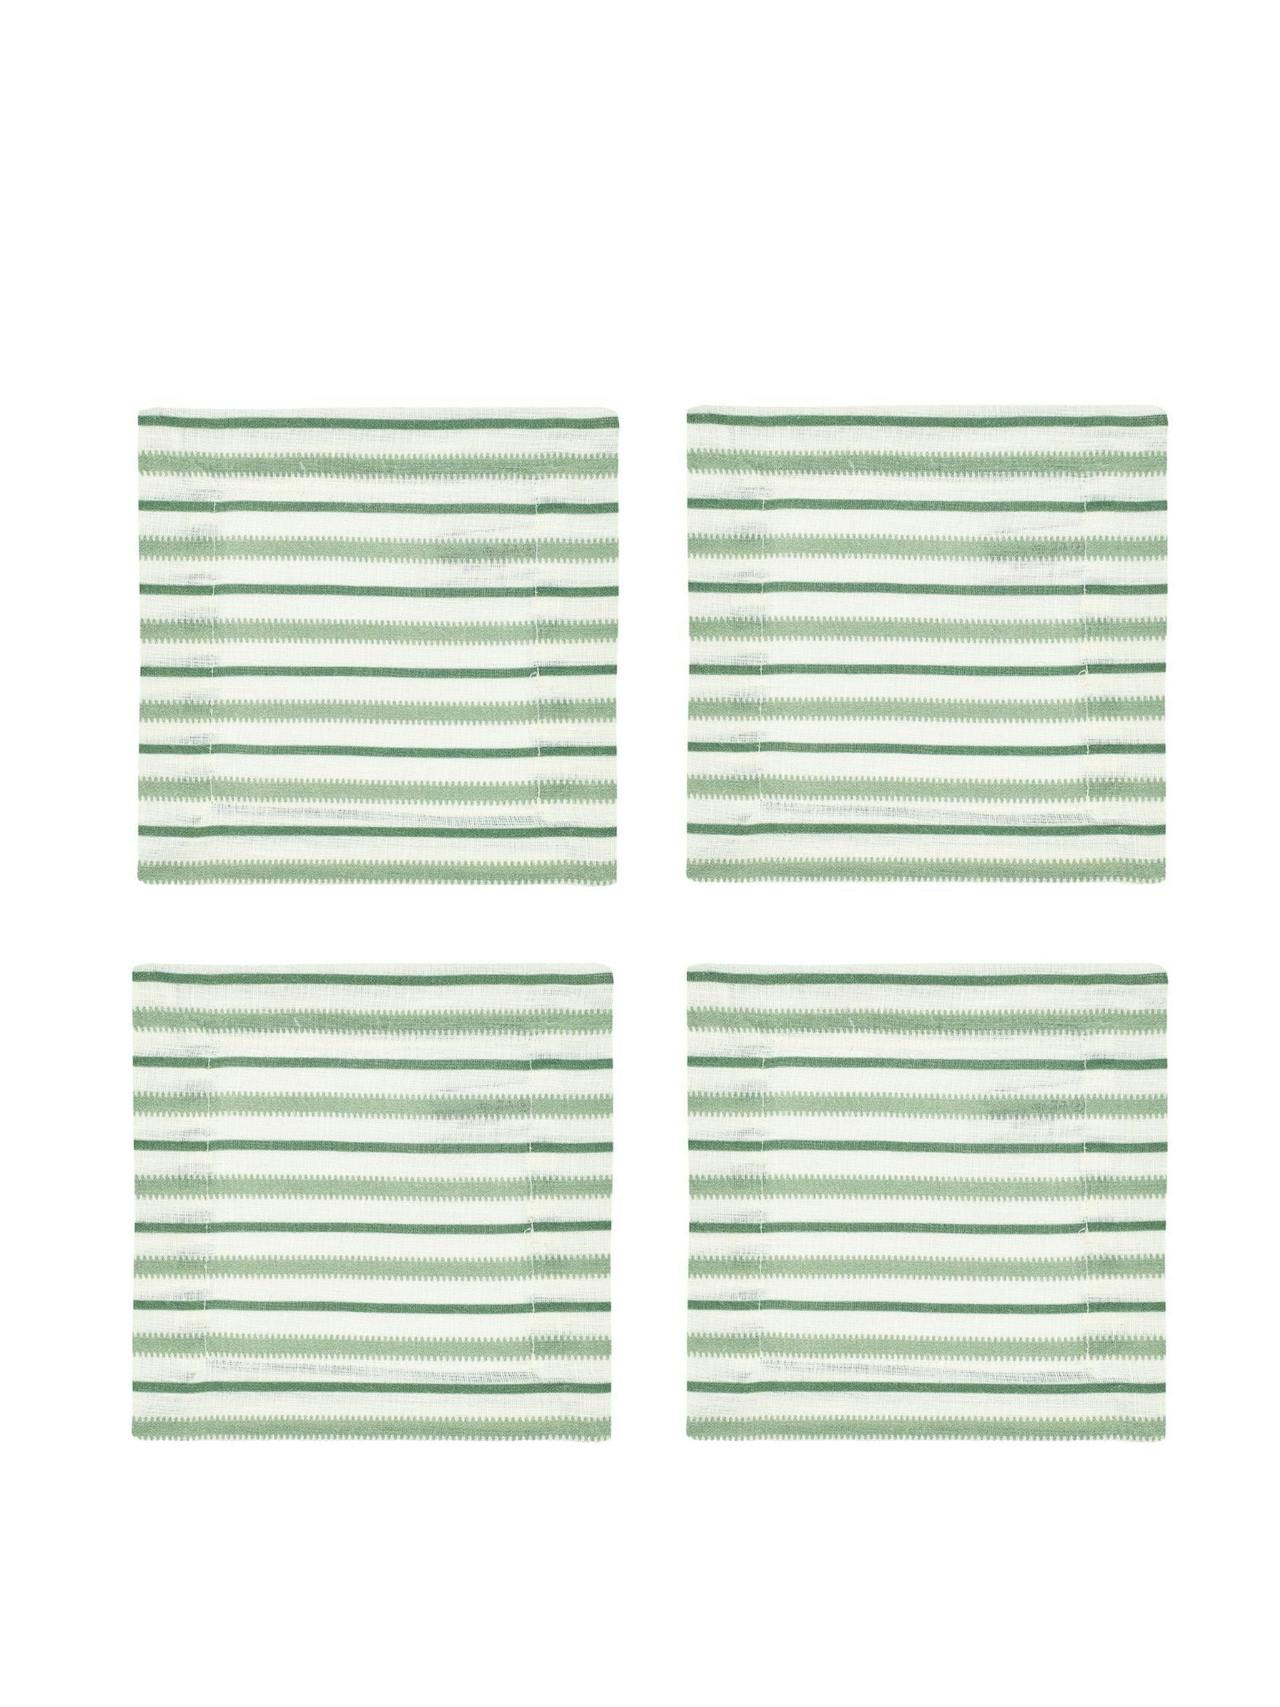 Victoria striped linen coasters in chalk & moss green, set of 4